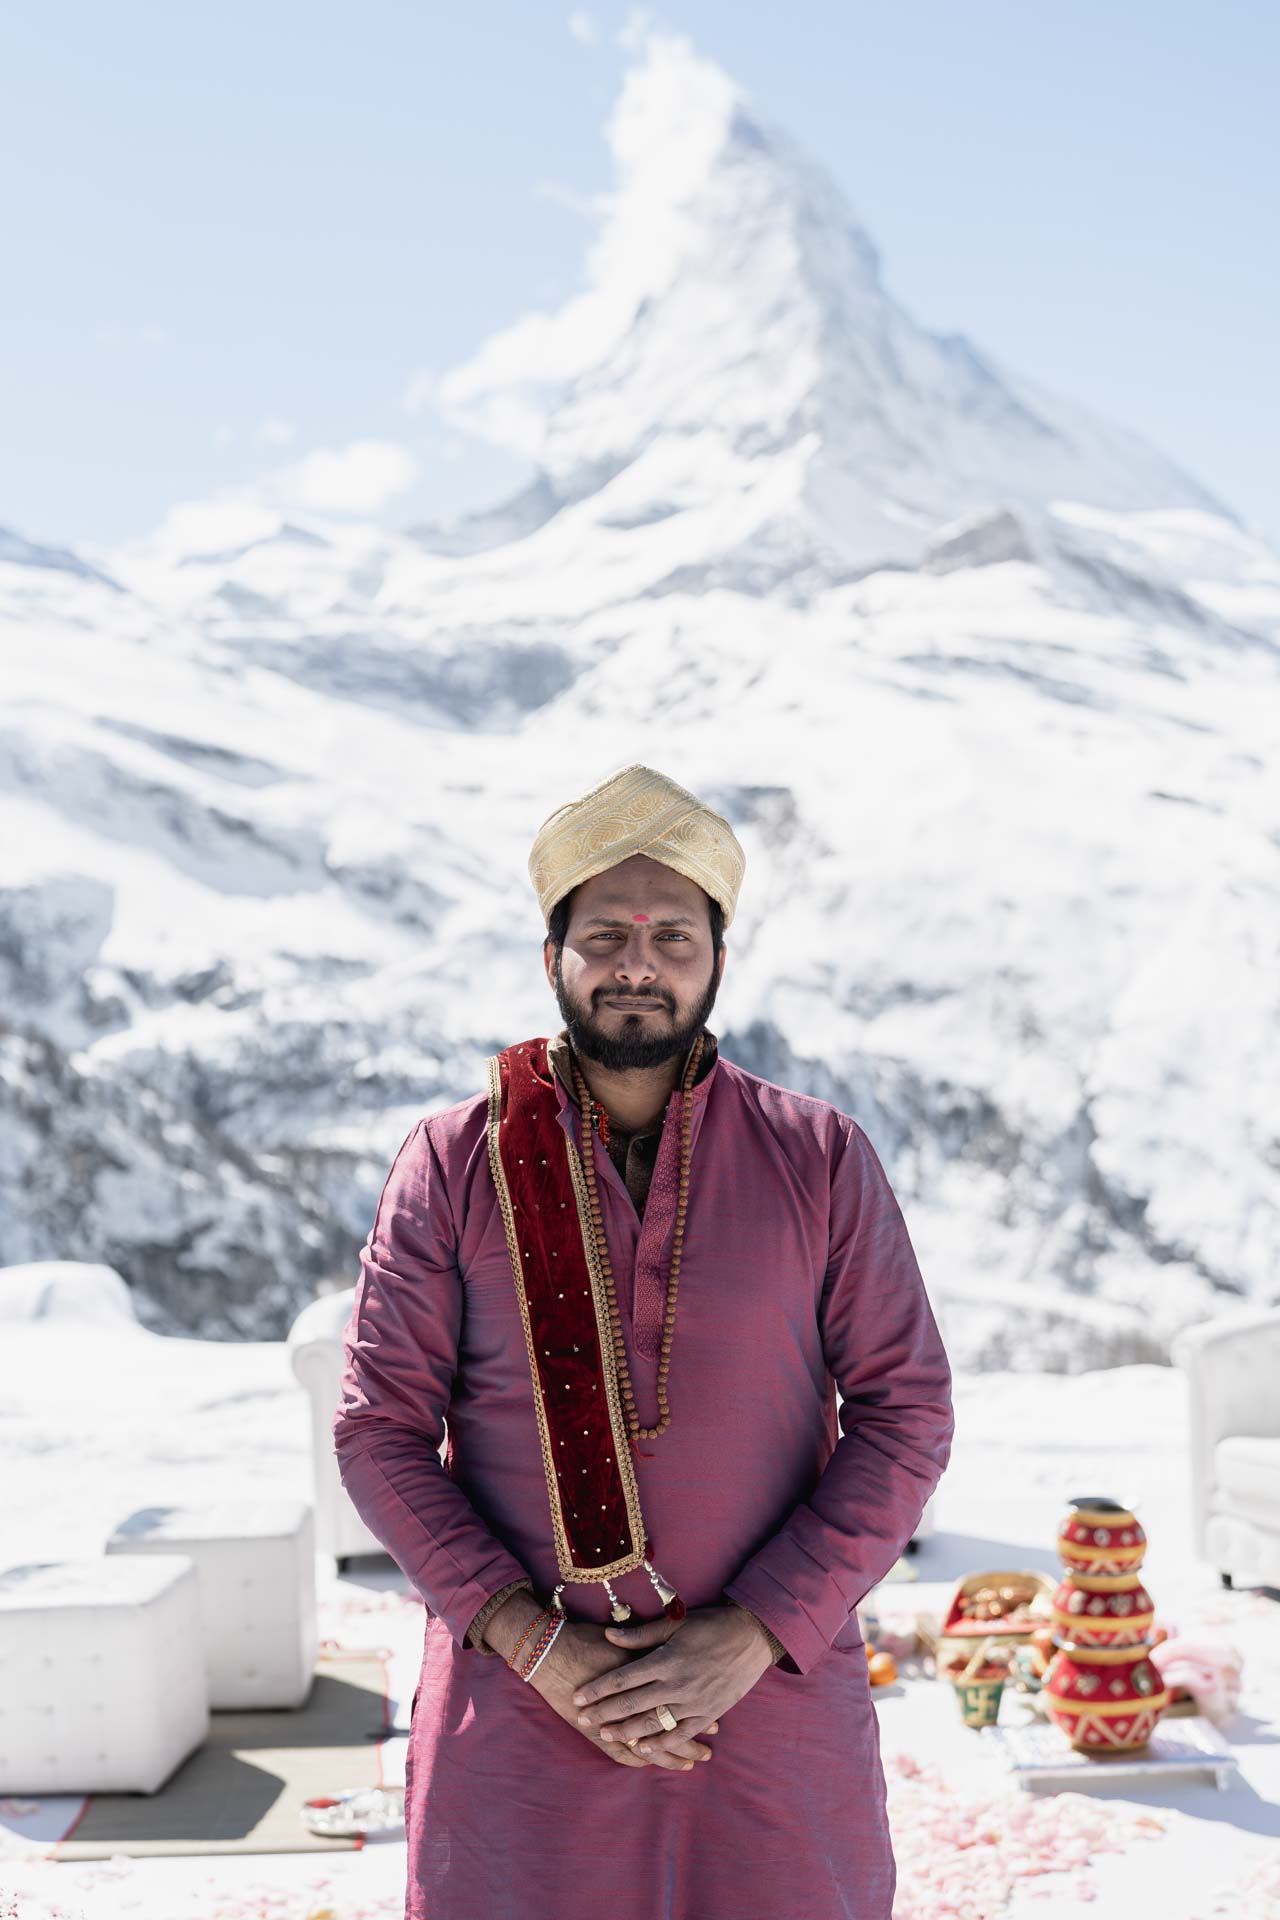 A wedding on the slopes of Matterhorn mountain, between the white of snow and the colors of India :: 26